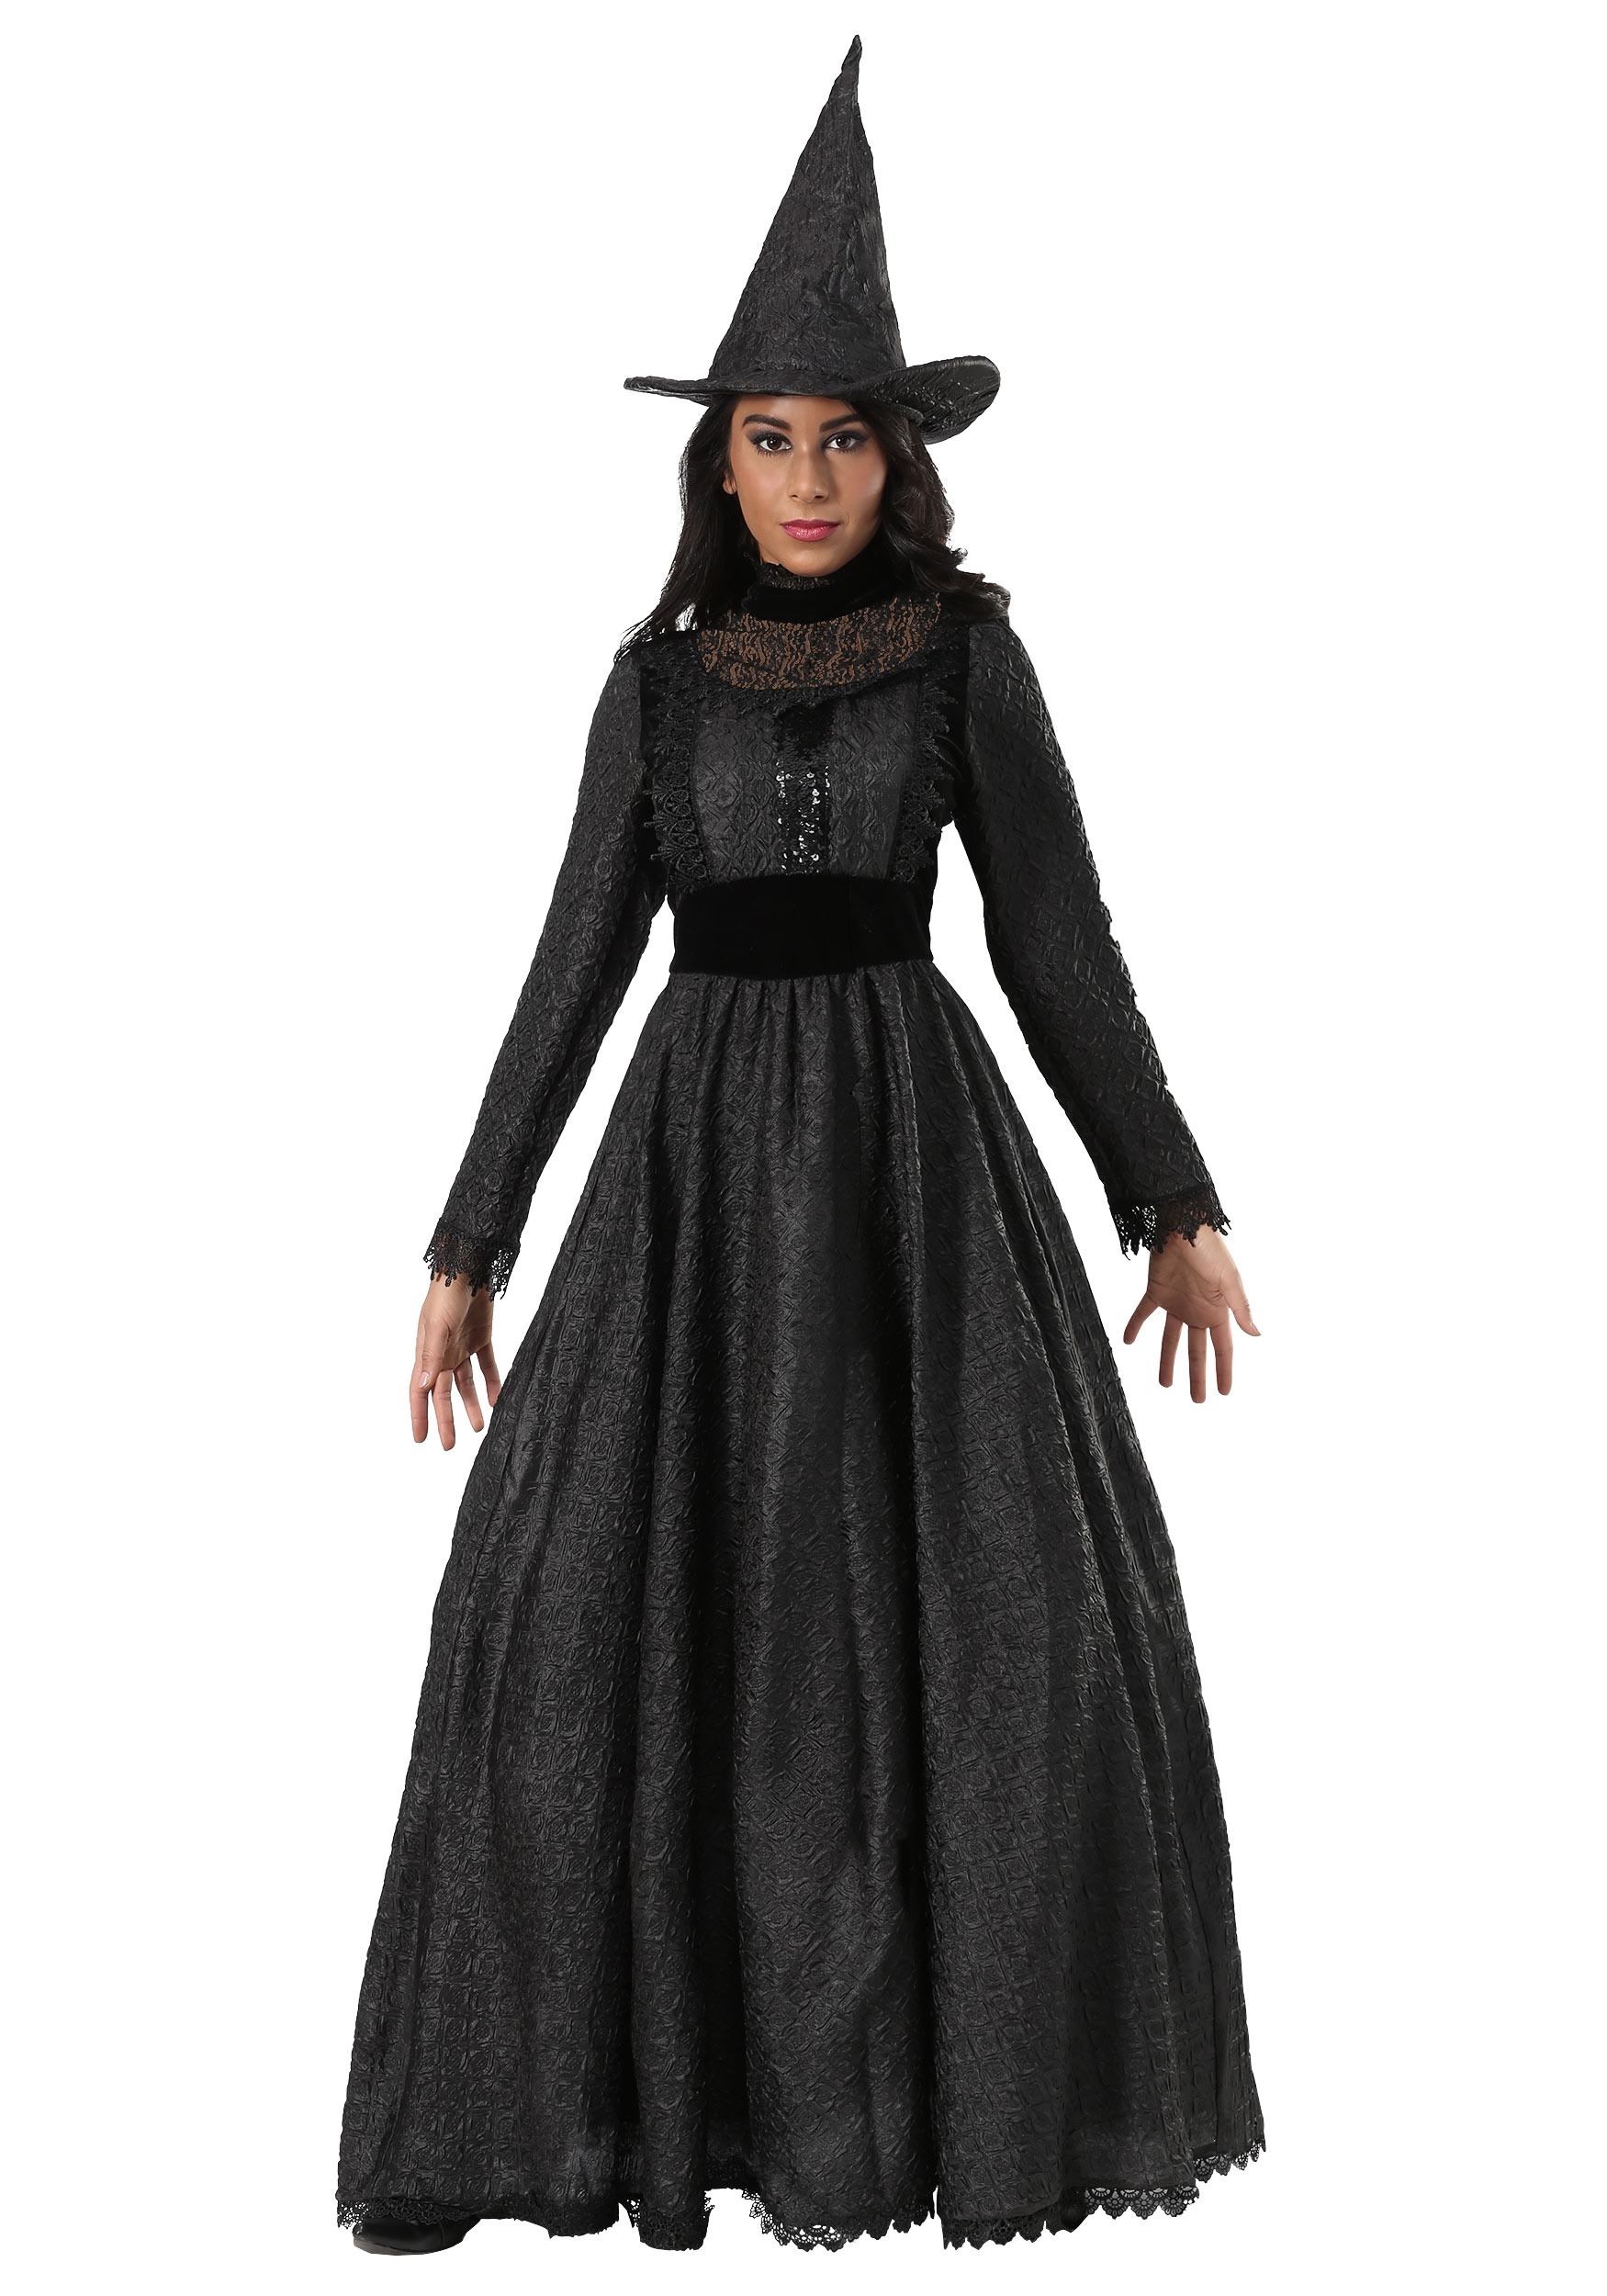 Image of Deluxe Plus Size Dark Witch Costume for Women ID FUN6695PL-3X